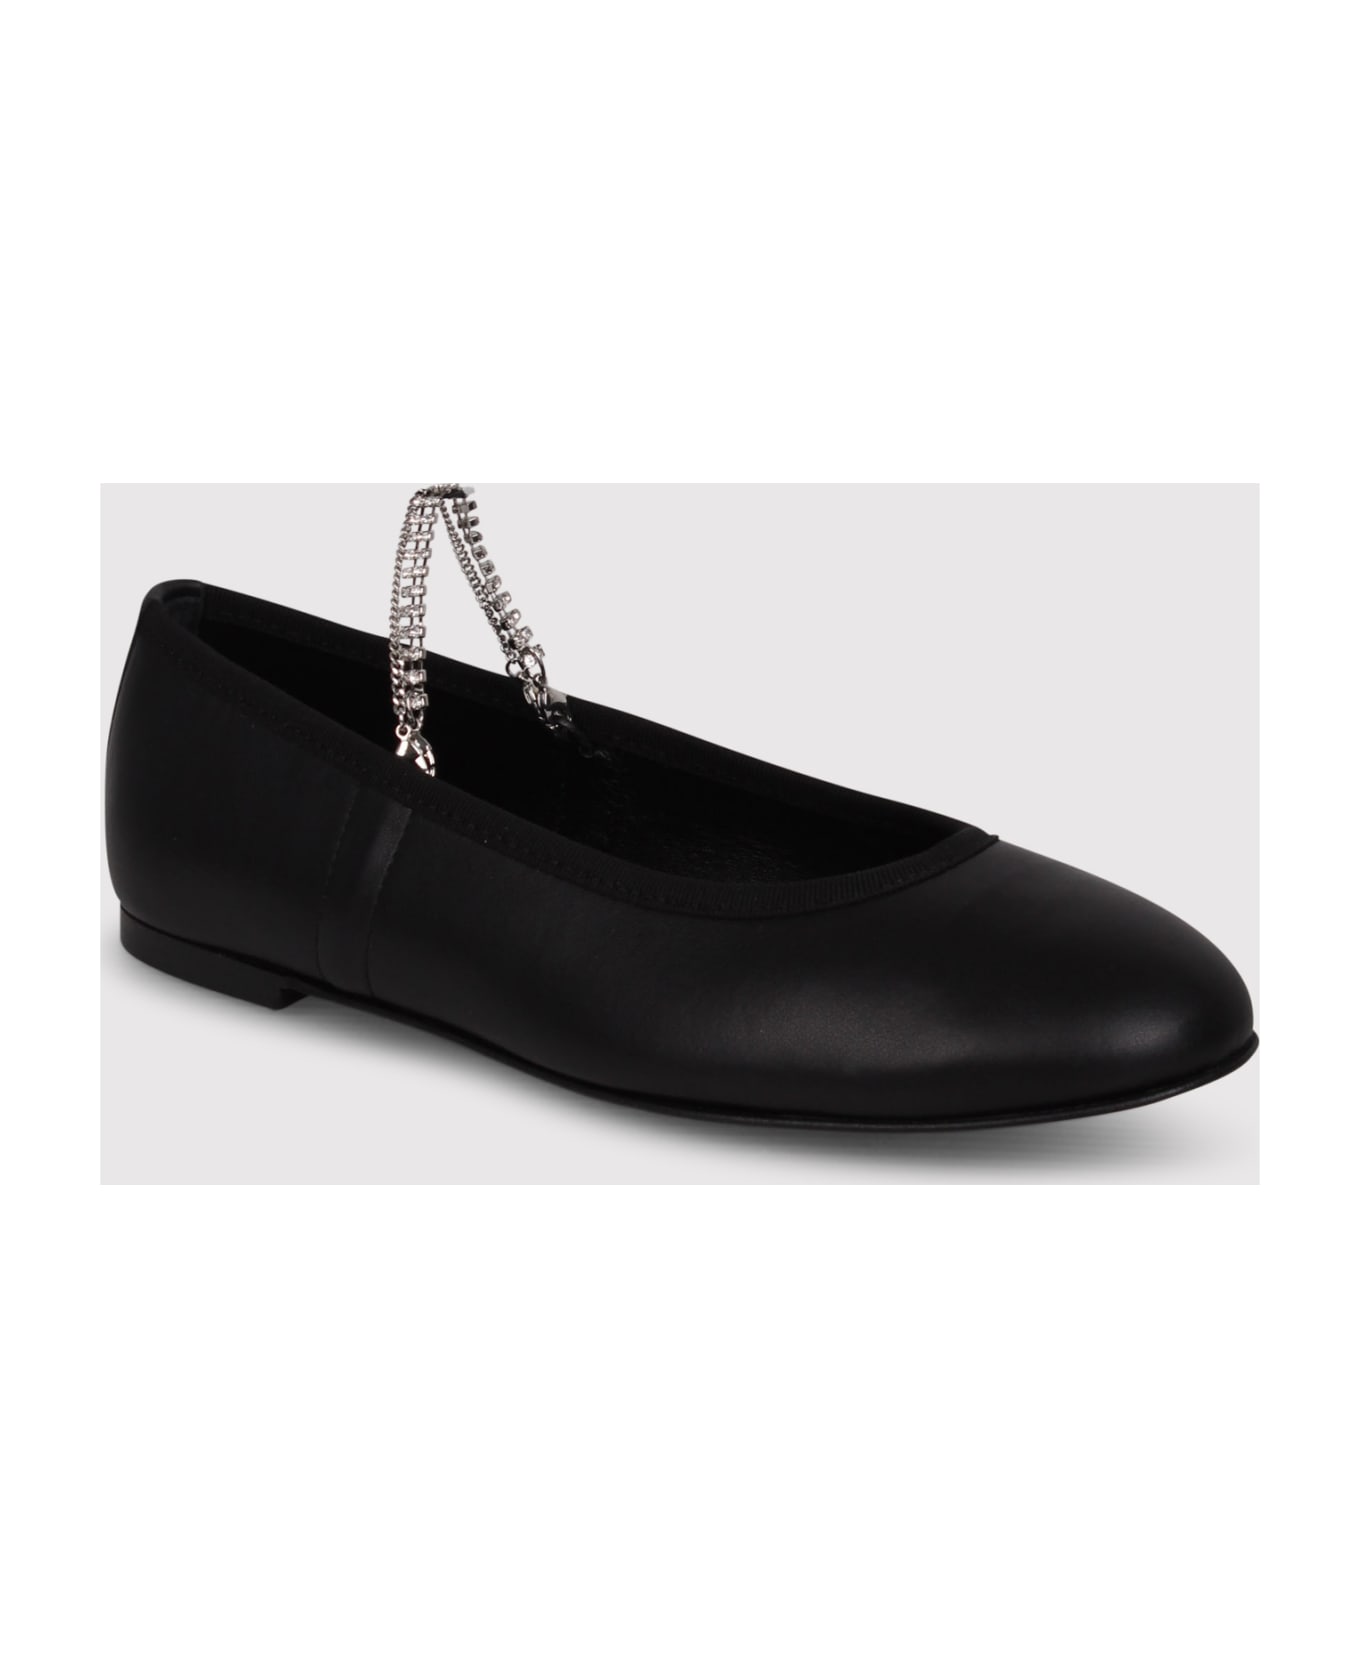 Kate Cate Juliette Leather Ballerina Shoes フラットシューズ